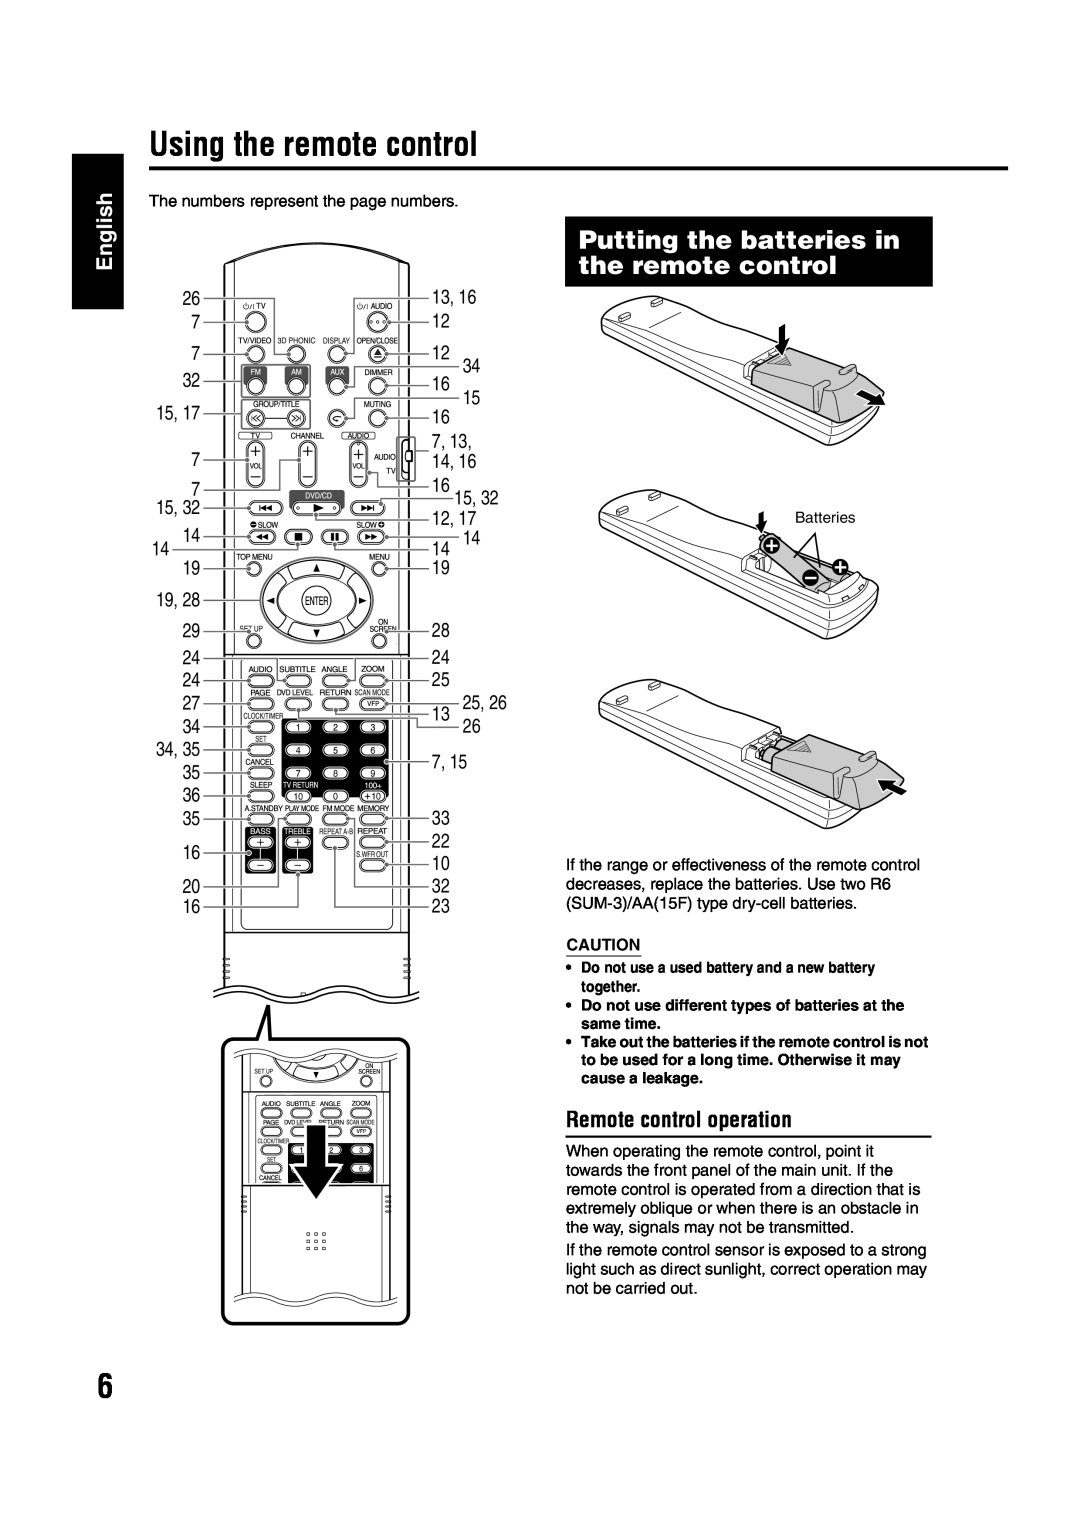 JVC GVT0142-001A Using the remote control, Putting the batteries in the remote control, Remote control operation, English 